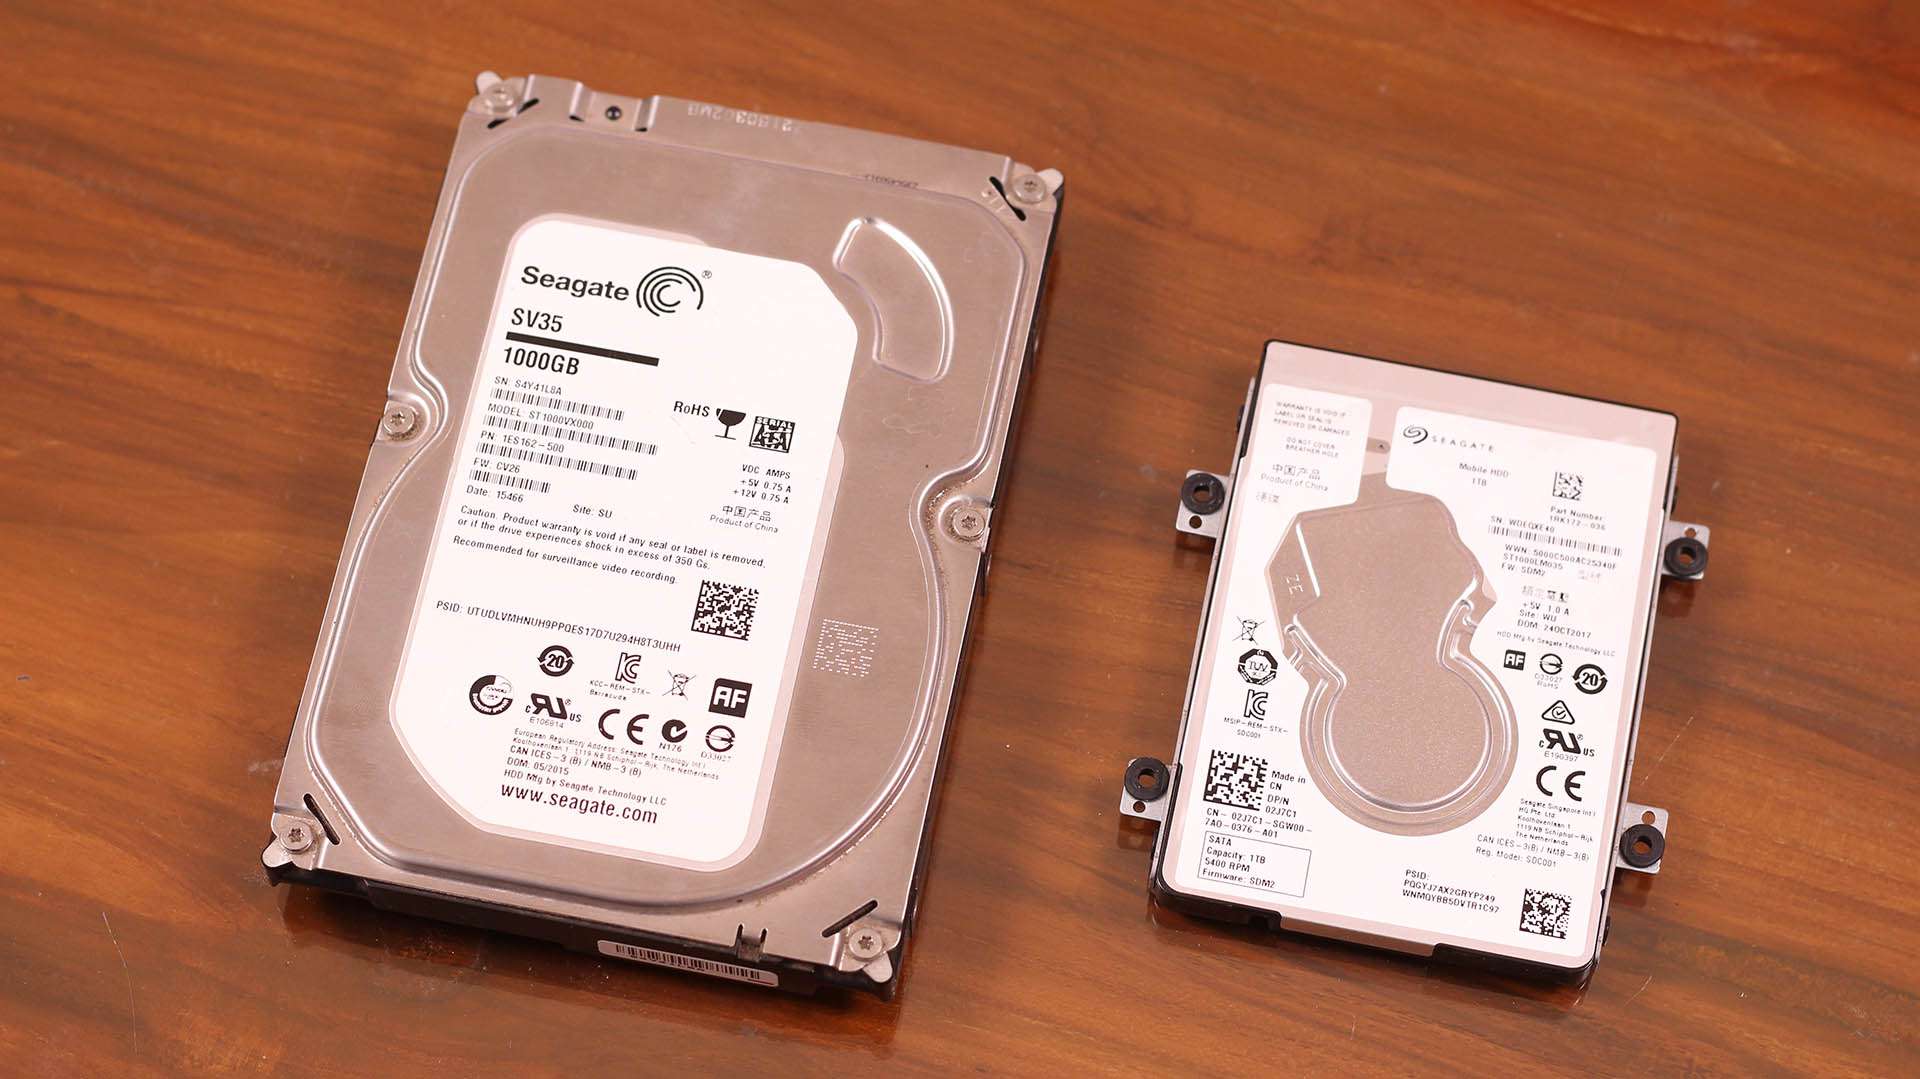 2.5 Vs 3.5 HDD: What is Better & Why?